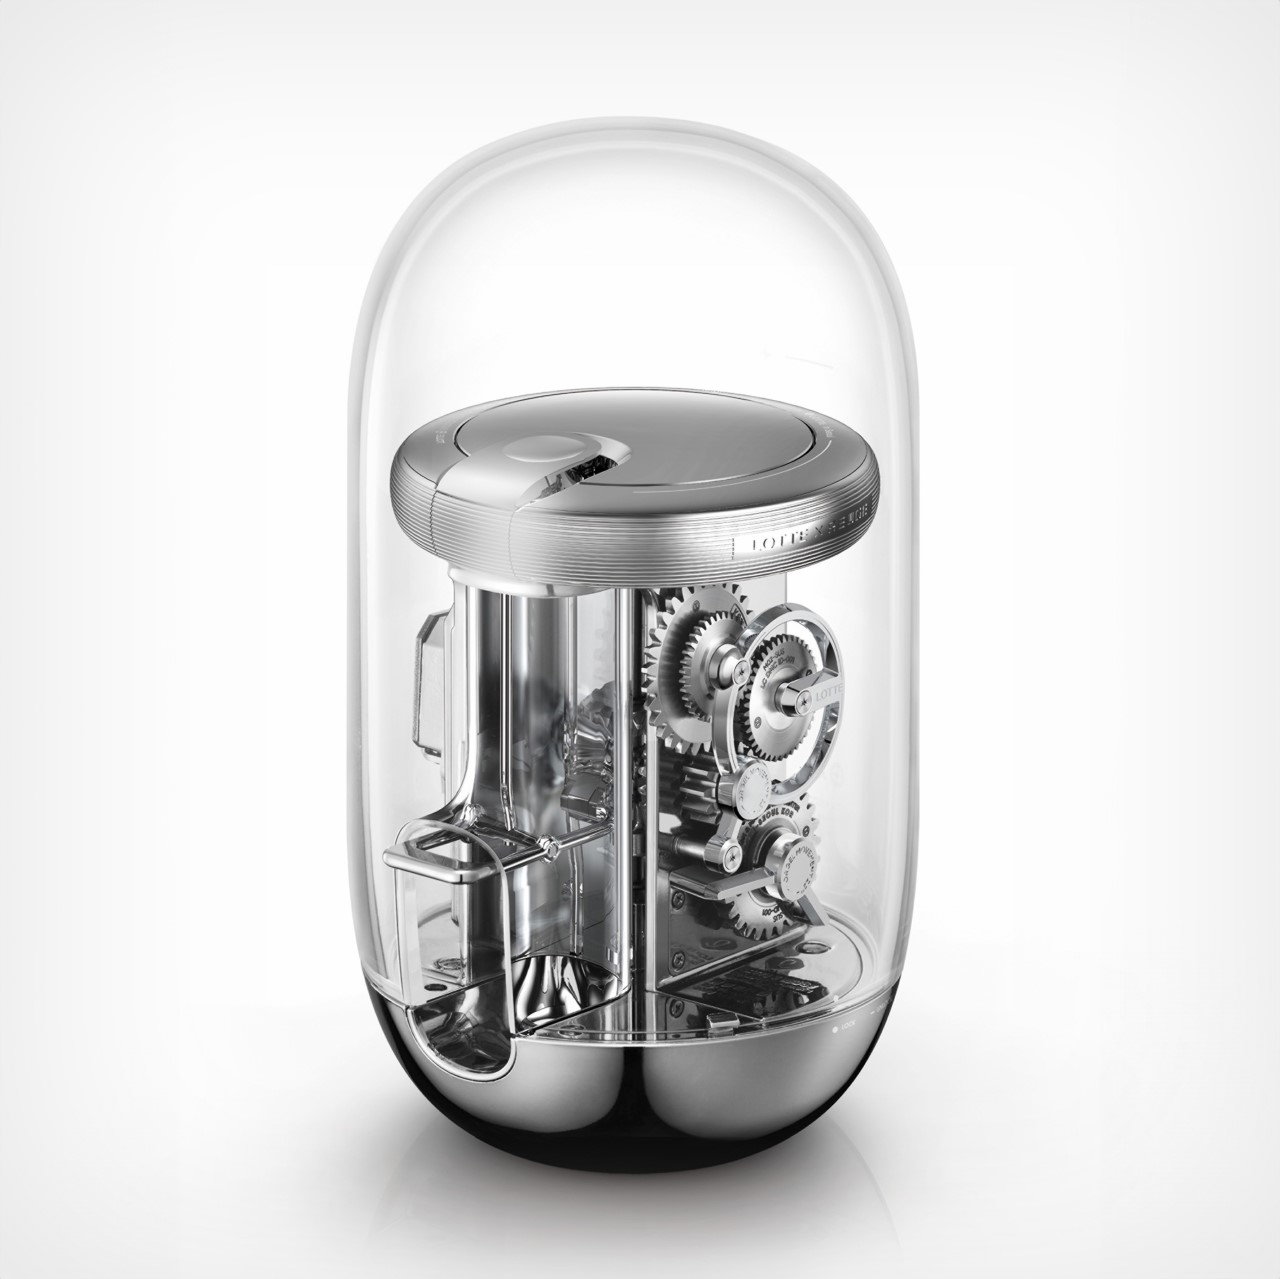 This Steampunk-Looking Gumball Machine from LOTTE Will Also Play Music for  You - Yanko Design